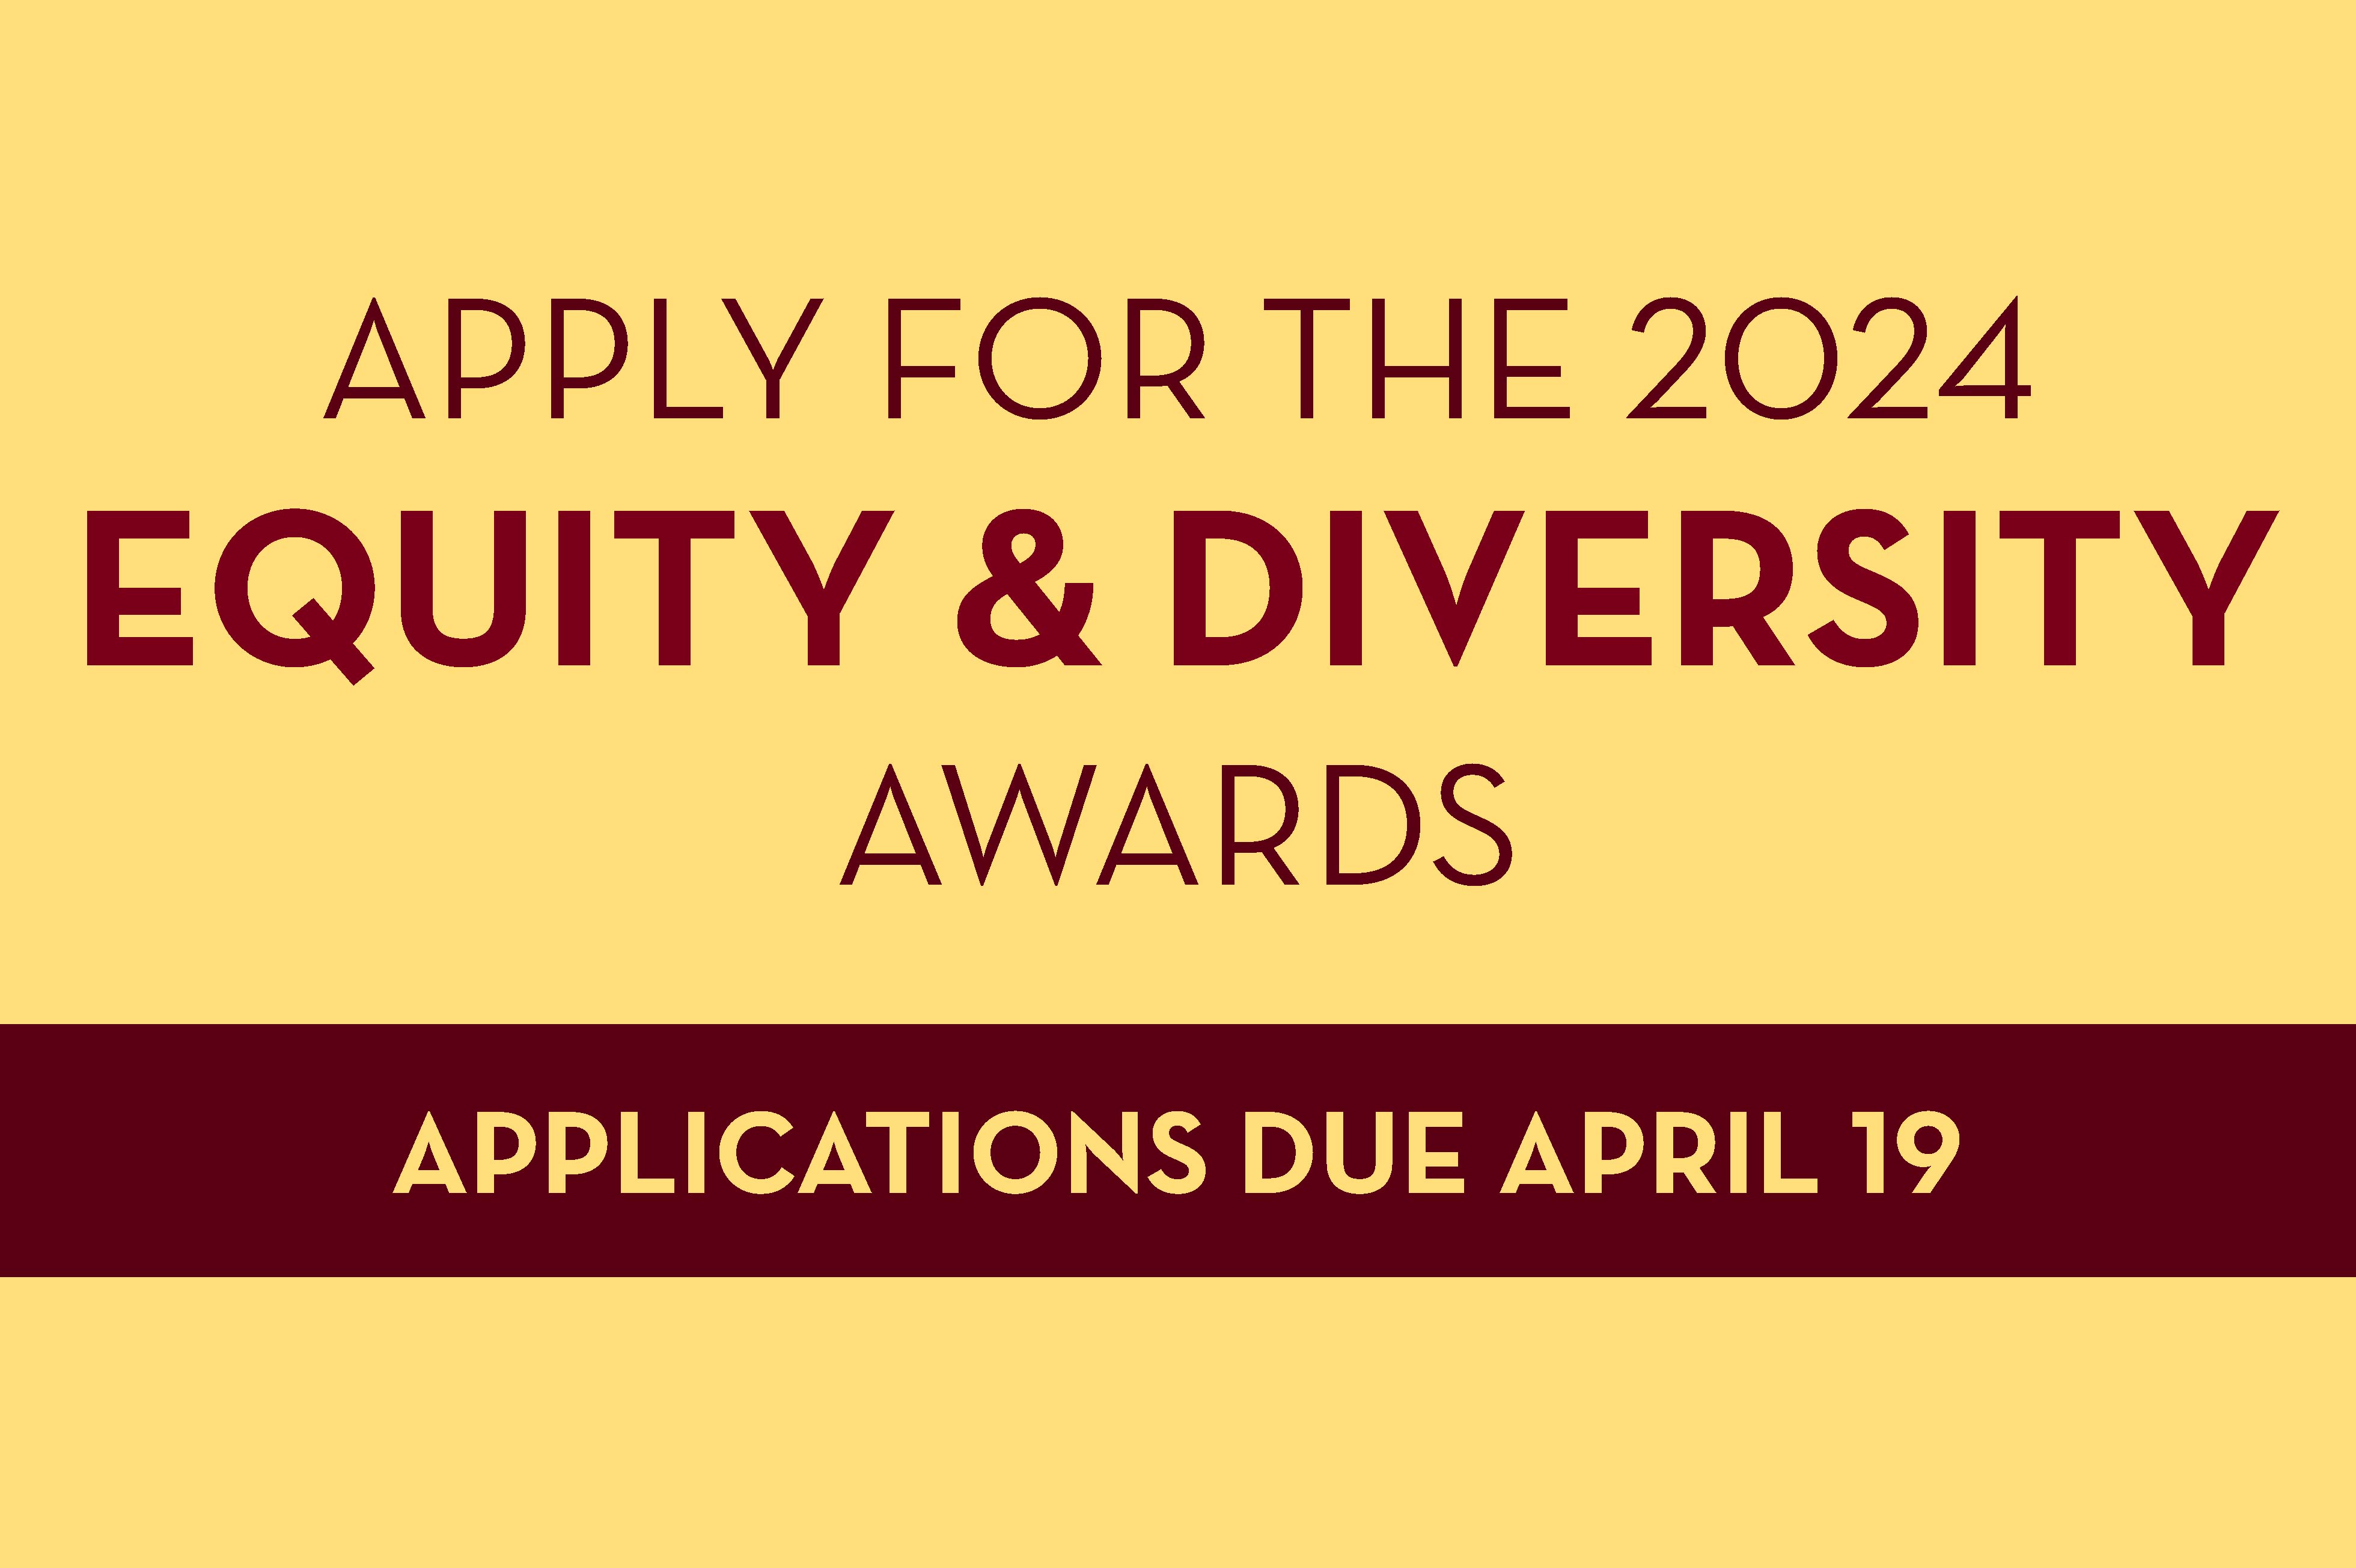 Apply for the Equity & Diversity Awards - Applications due April 19